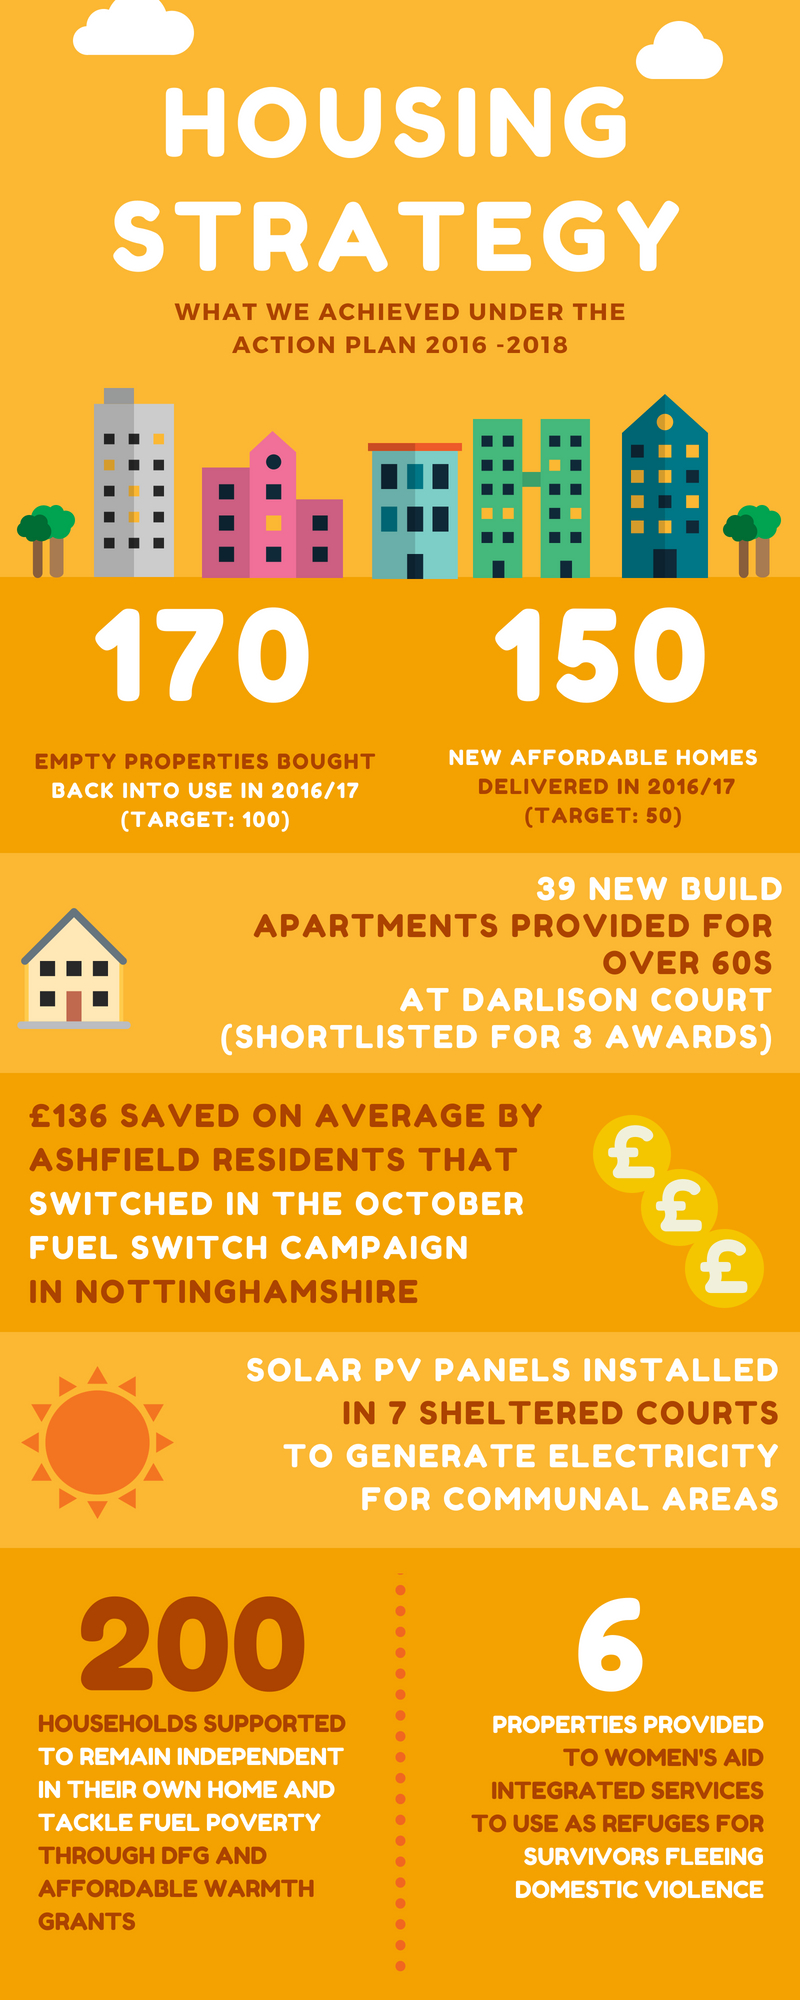 Housing strategy infographic showing achievements of council 